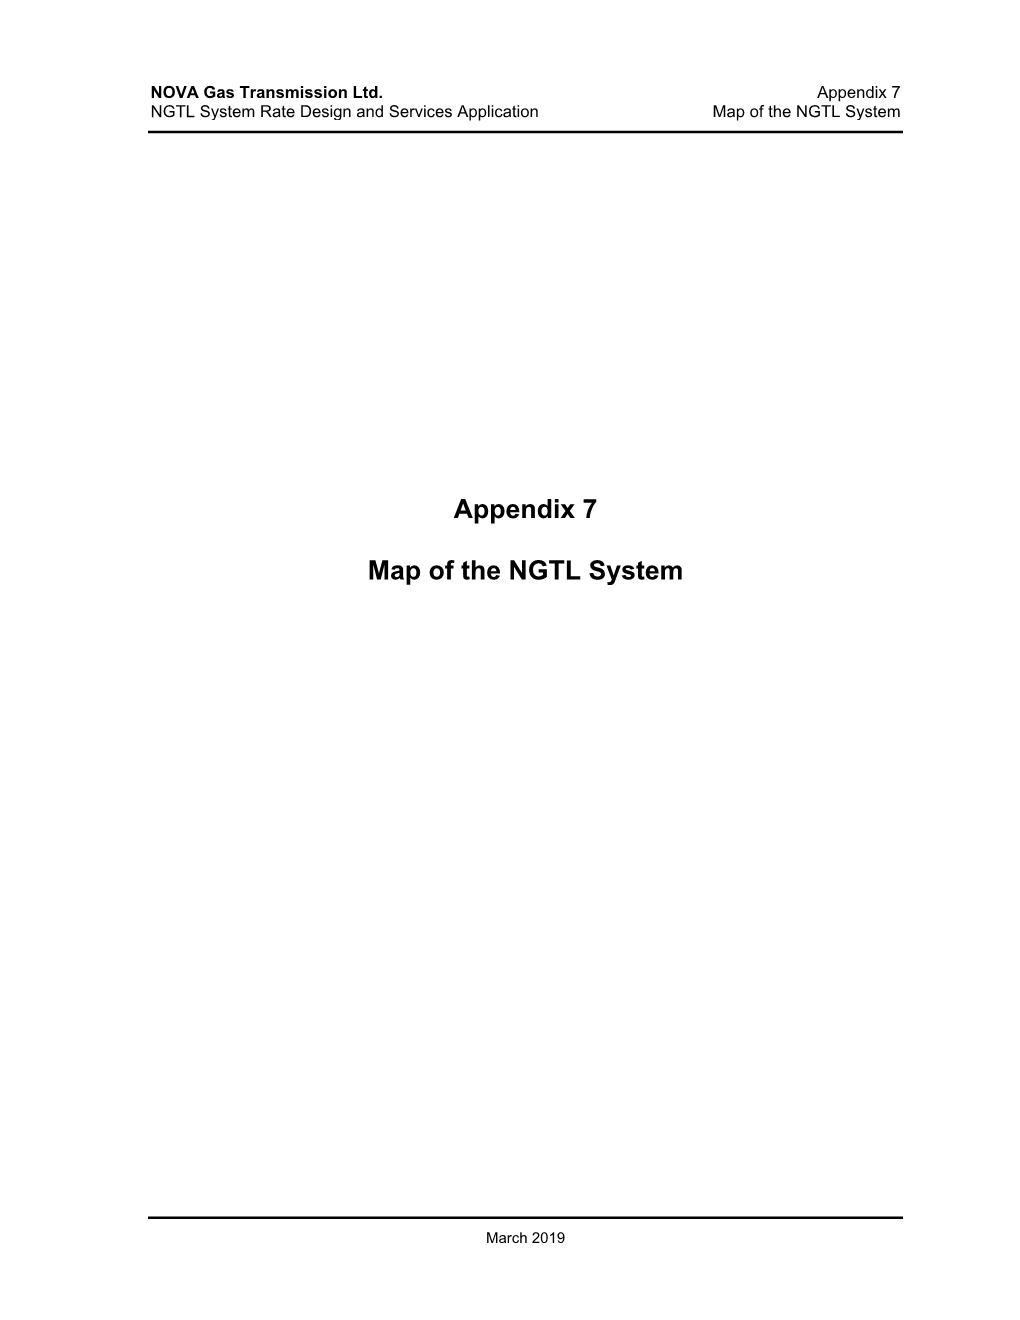 A98318-9 Appendix 7 Map of the NGTL System